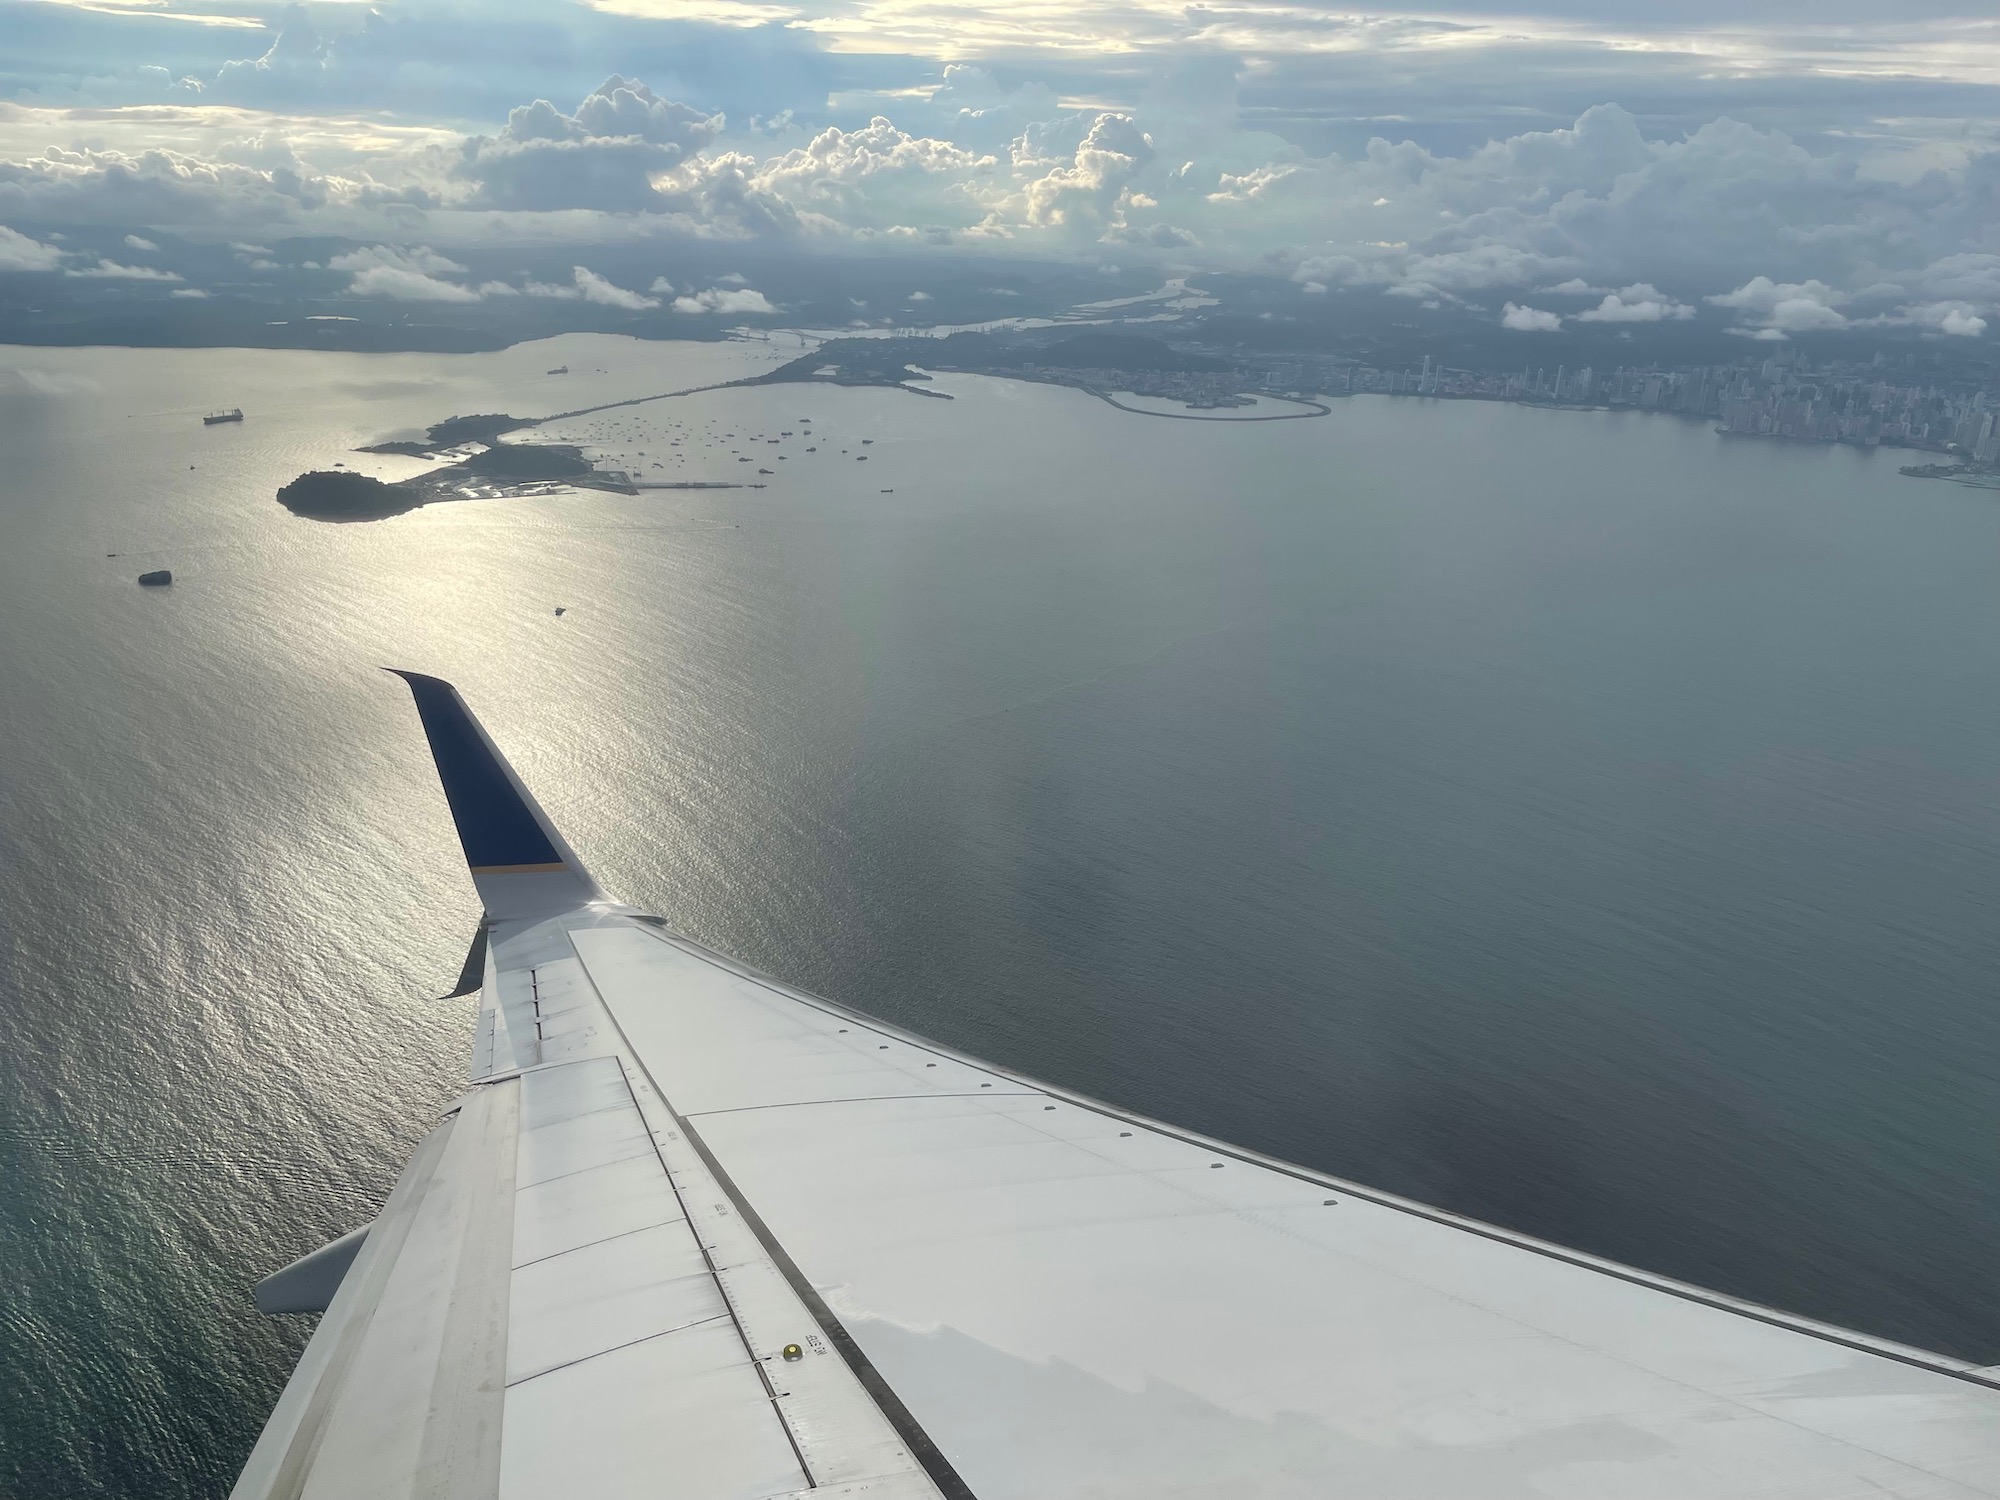 Review: Copa Airlines 737-800 Economy Class - Live and Let's Fly